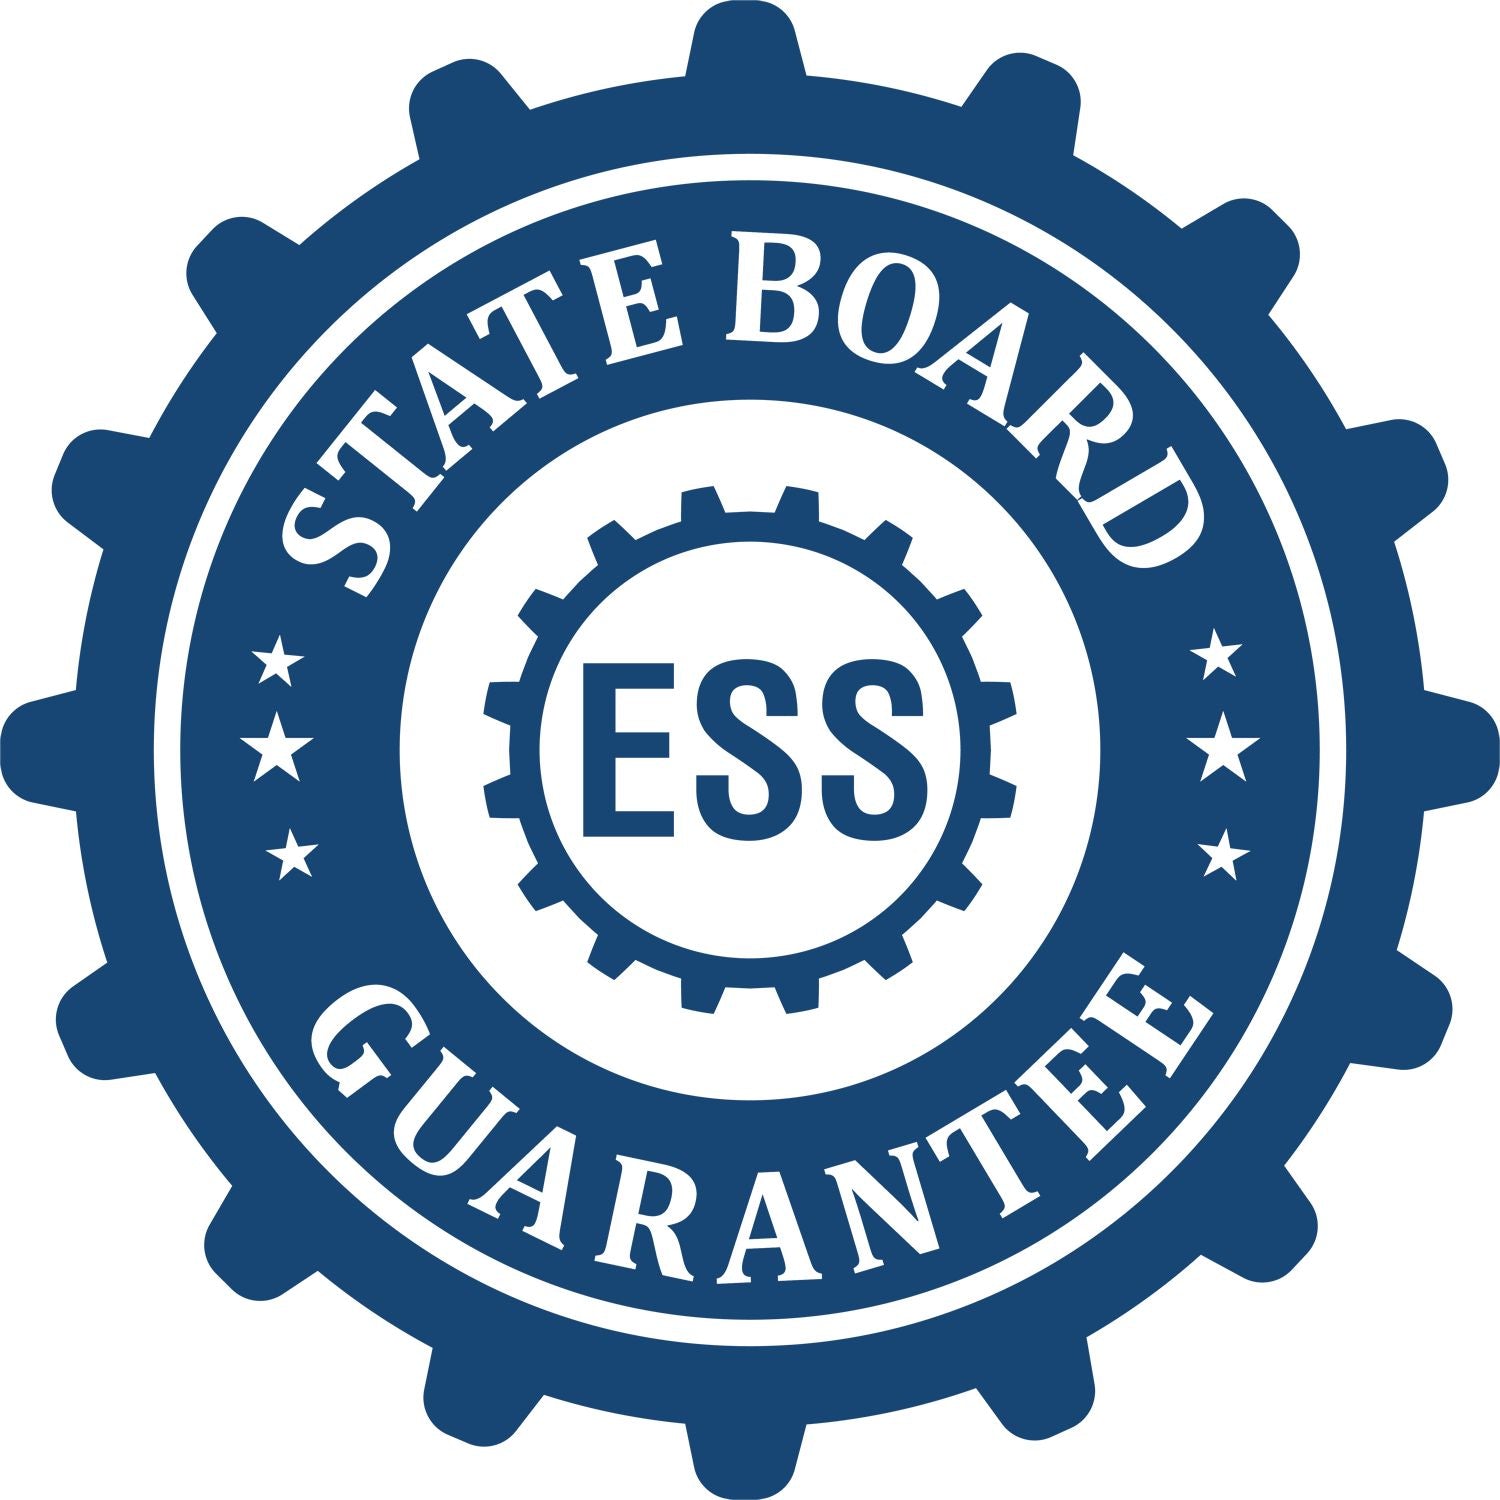 An emblem in a gear shape illustrating a state board guarantee for the State of Wisconsin Extended Long Reach Engineer Seal product.